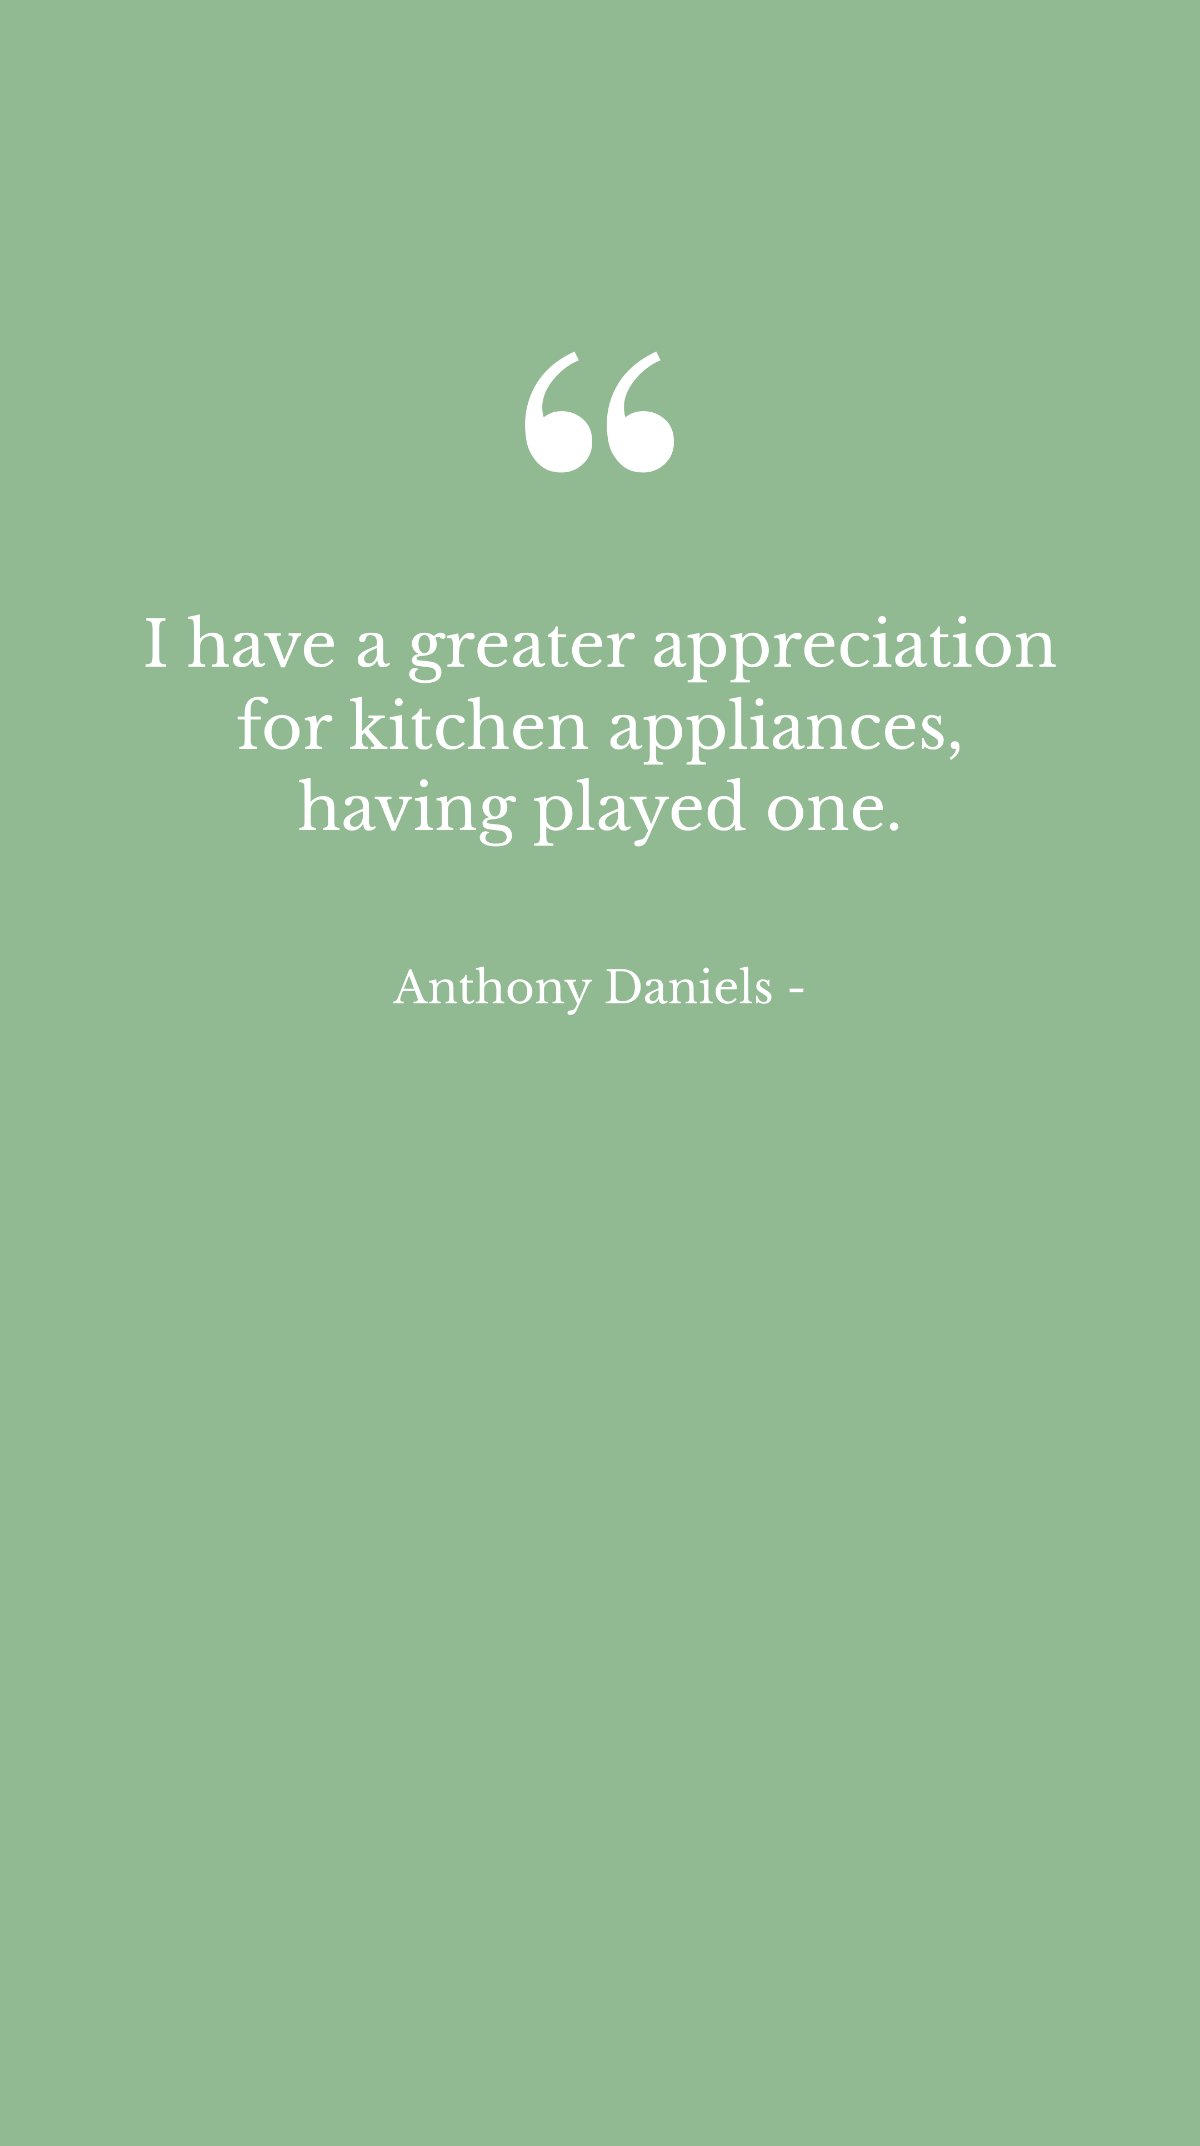 Anthony Daniels - I have a greater appreciation for kitchen appliances, having played one. Template